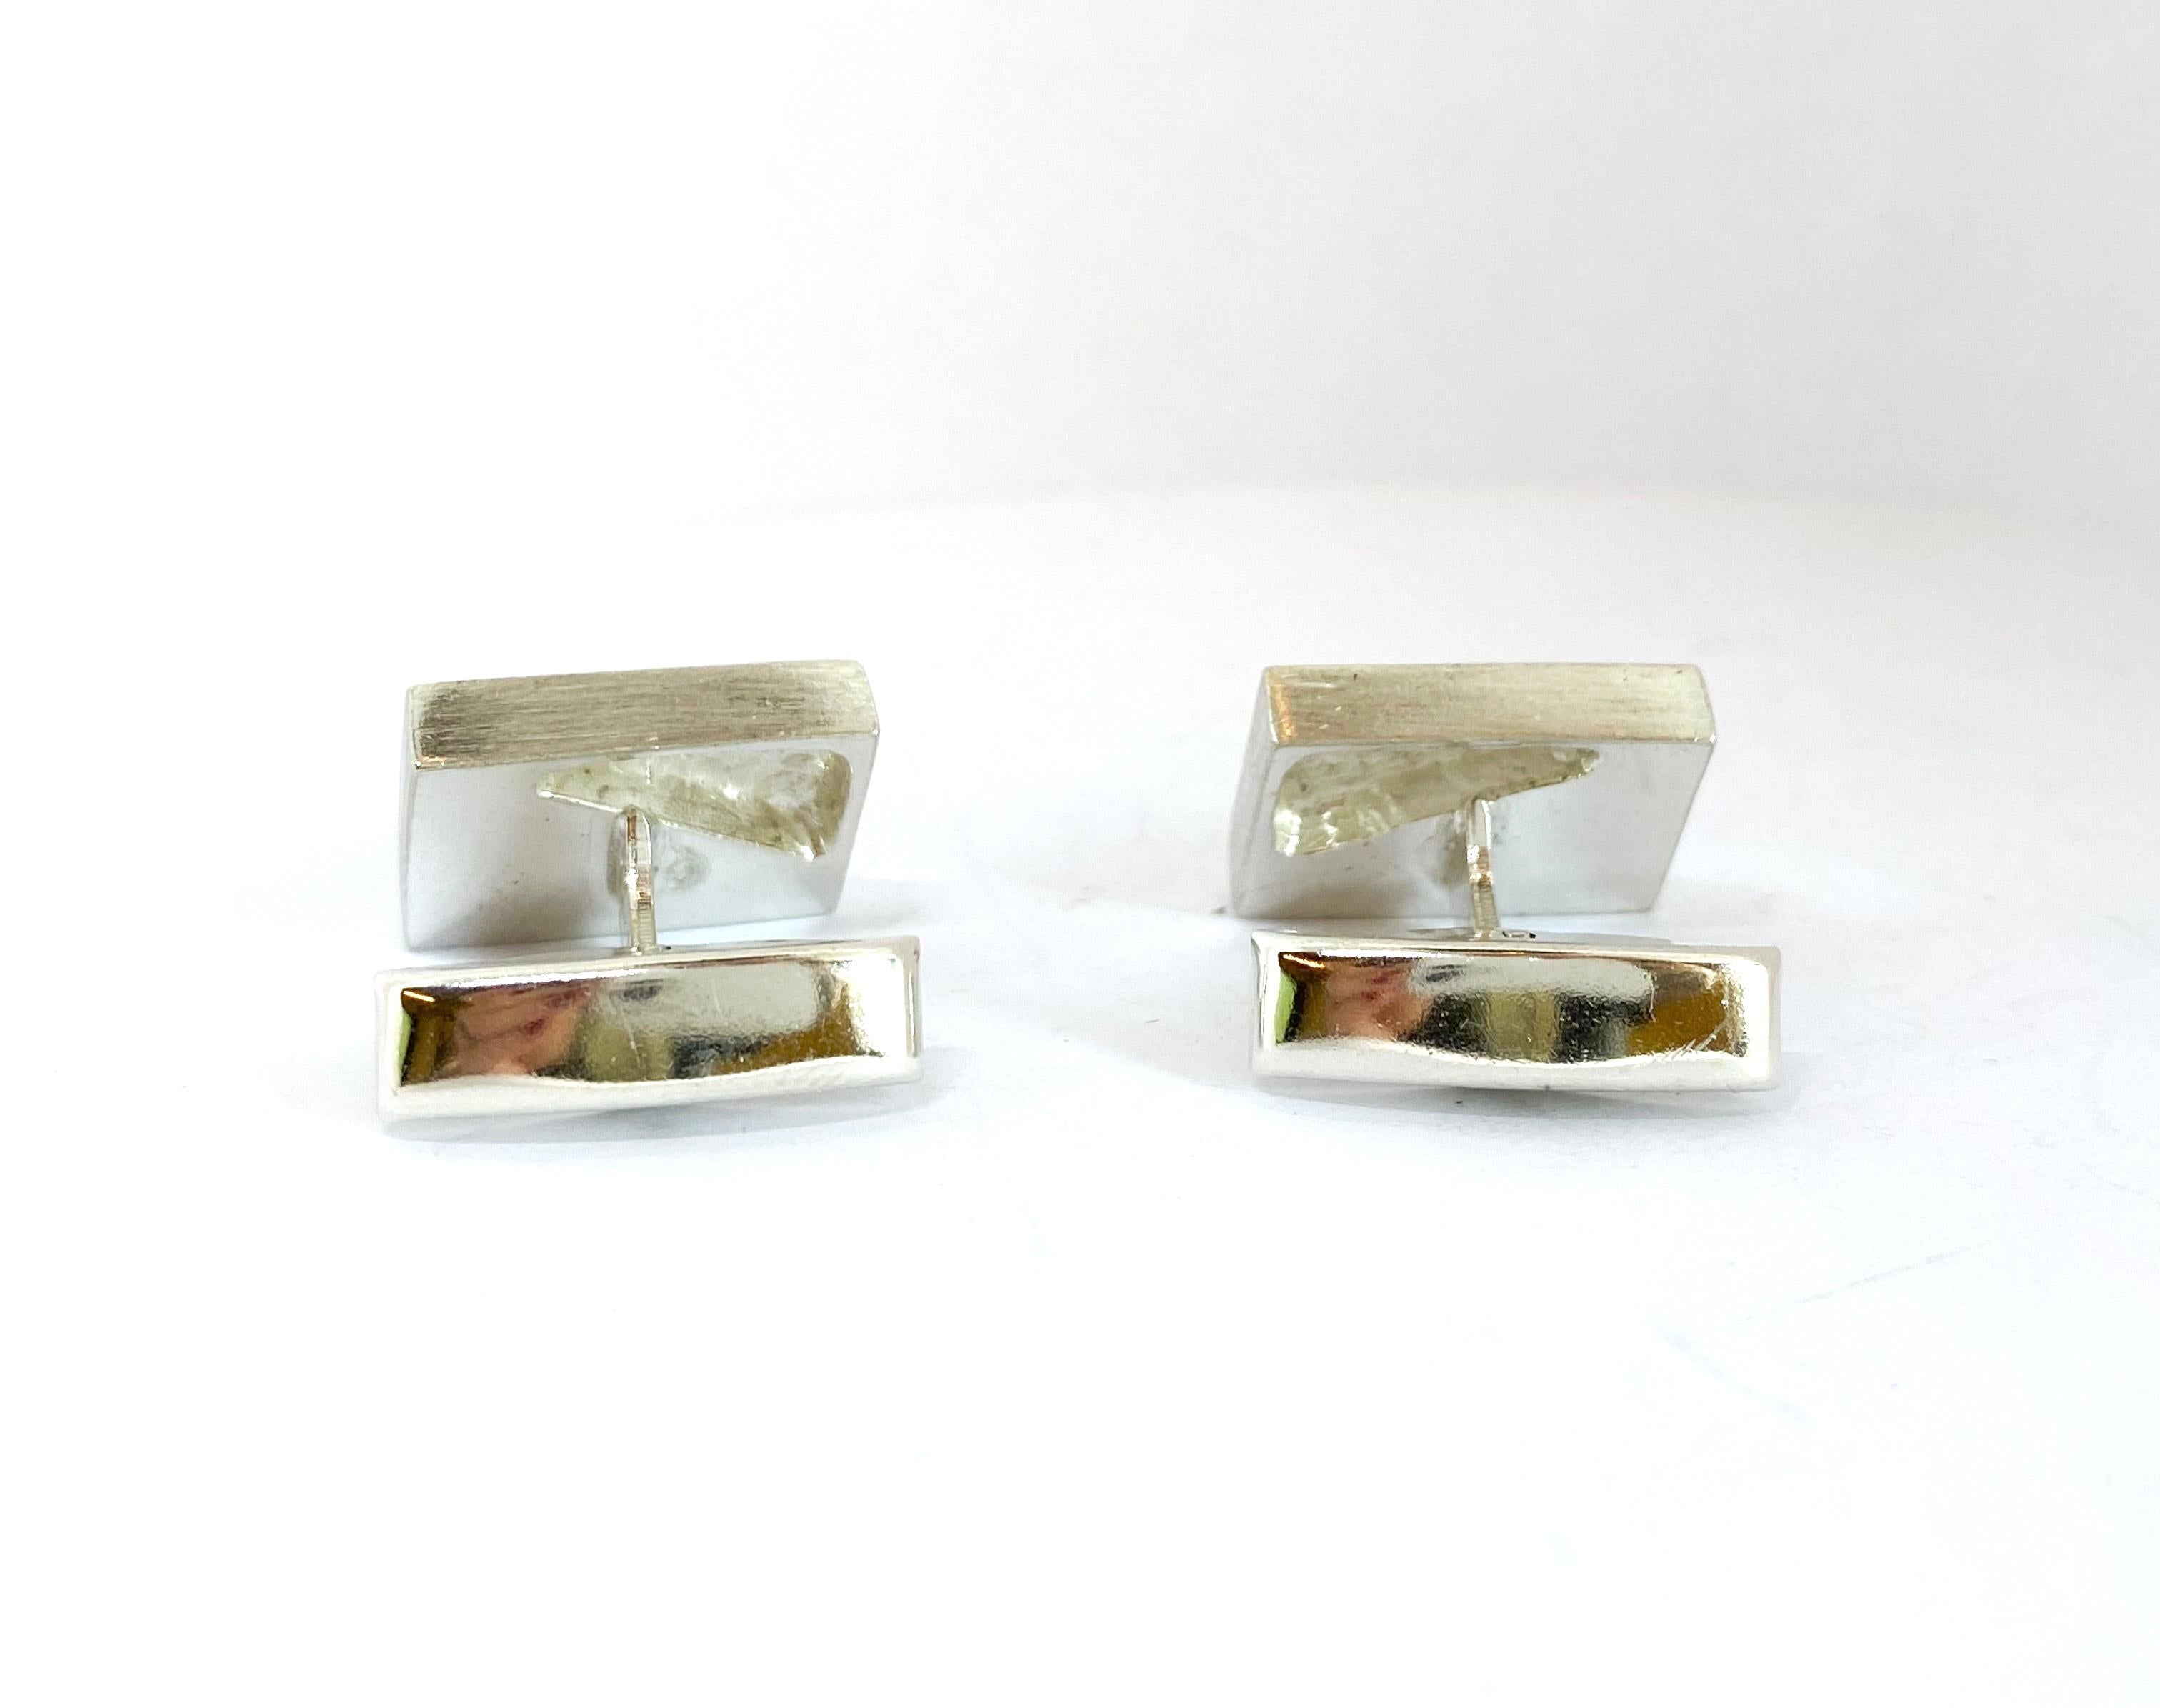 925 Sterling Silver Finland Cufflinks Spectrolite
Unused new Cufflinks.
Stock of an old discontinued jeweler's shop.
Circa 1990 ? Not polished,
Made Vaasa Finland.
Stamp JA =Johan Edvard Appelgren 

Spectrolite Stone:
Due to its brilliant light